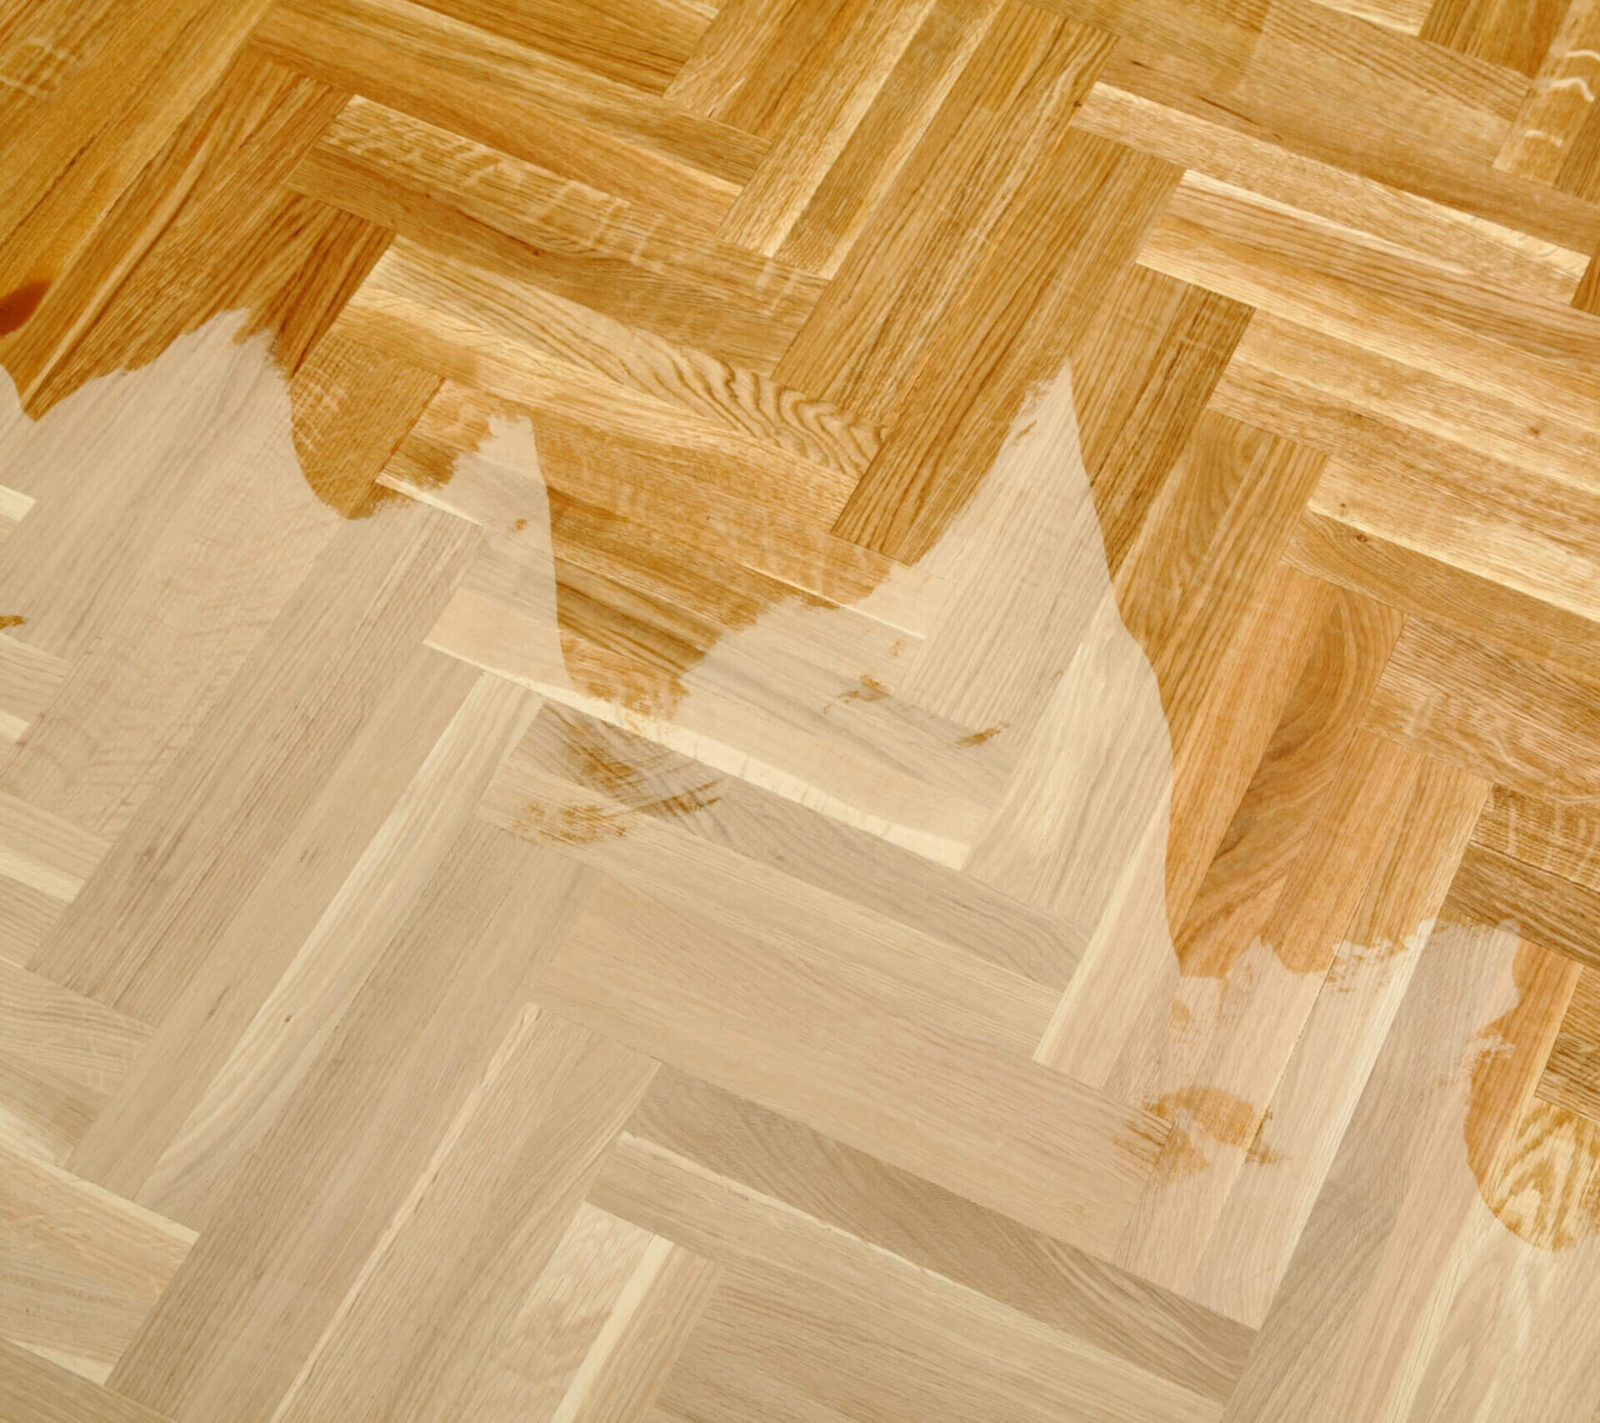 stufex - Varnishing of oak parquet floor, first layer of lacquer